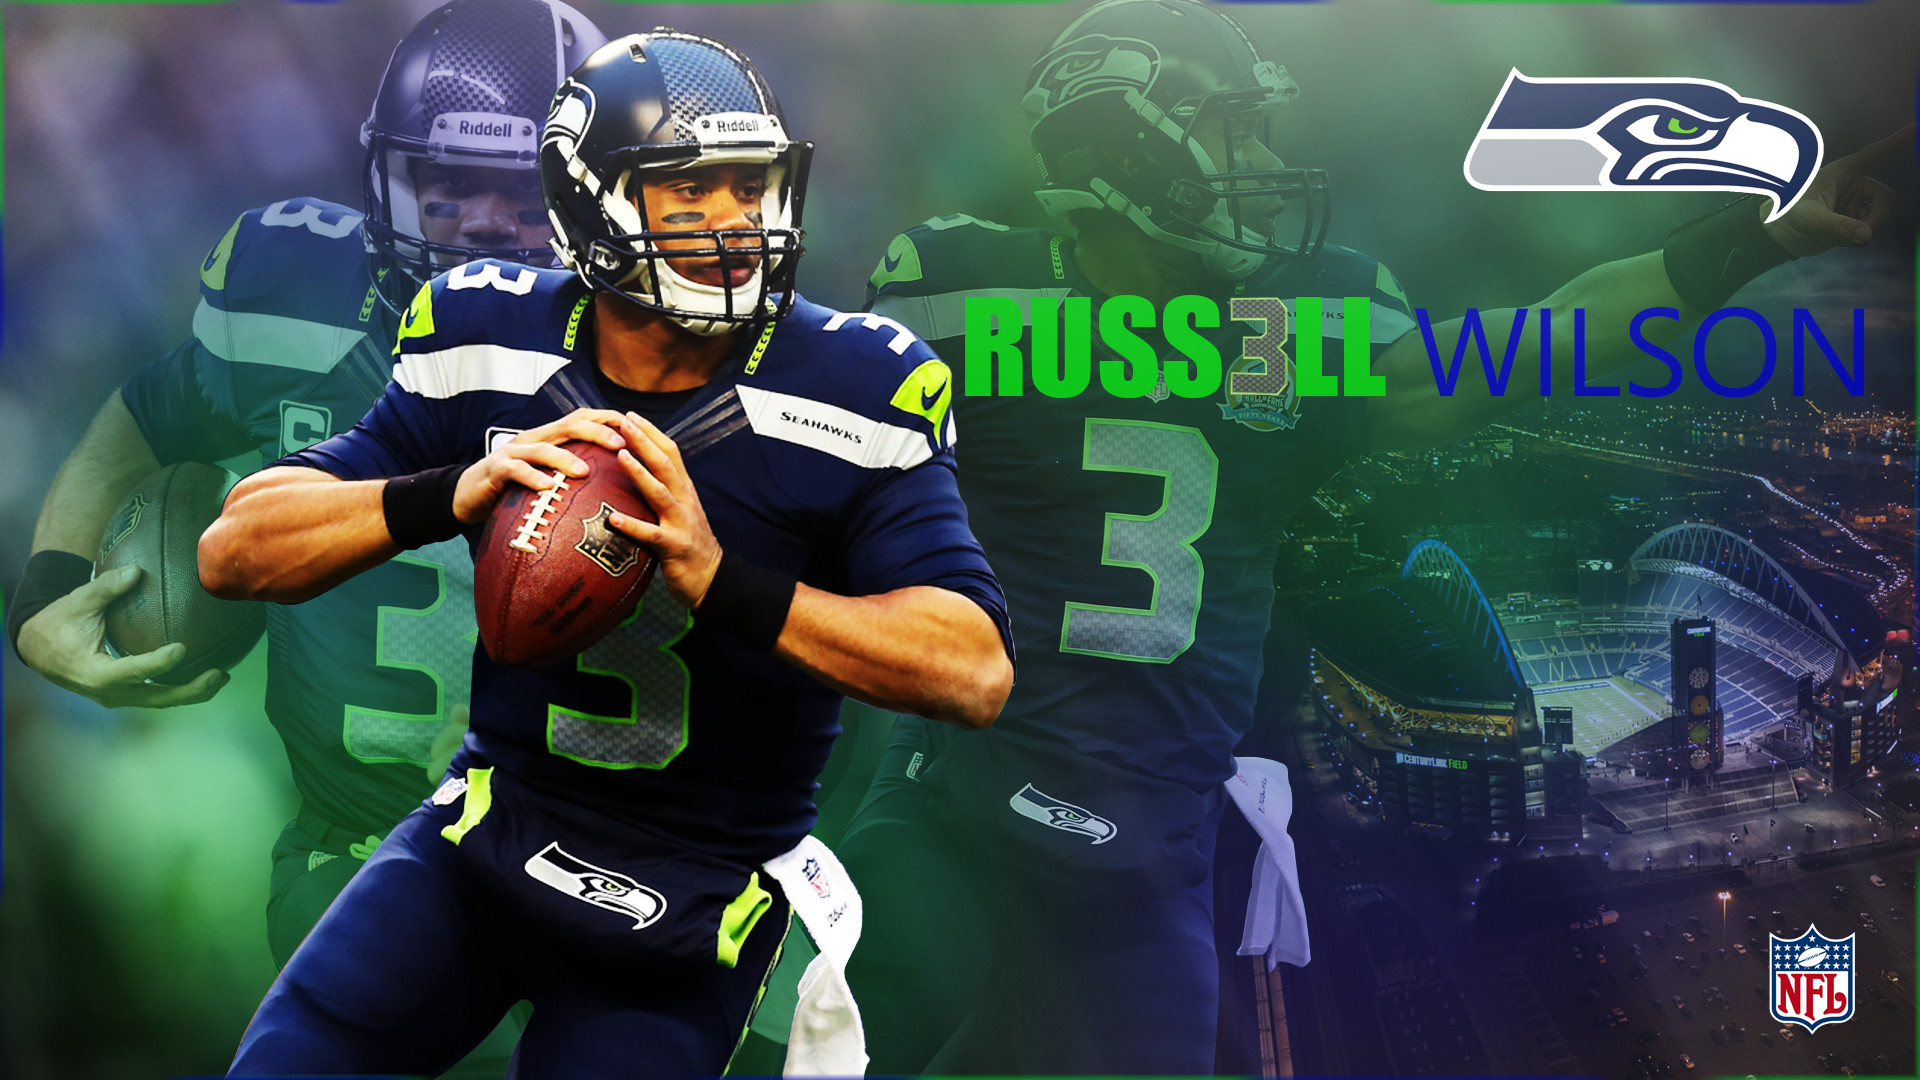 Download wallpapers Russell Wilson NFL 4K Seattle Seahawks creative  portrait grunge style creative paint art quarterback American football  USA National Football League for desktop with resolution 3840x2400 High  Quality HD pictures wallpapers